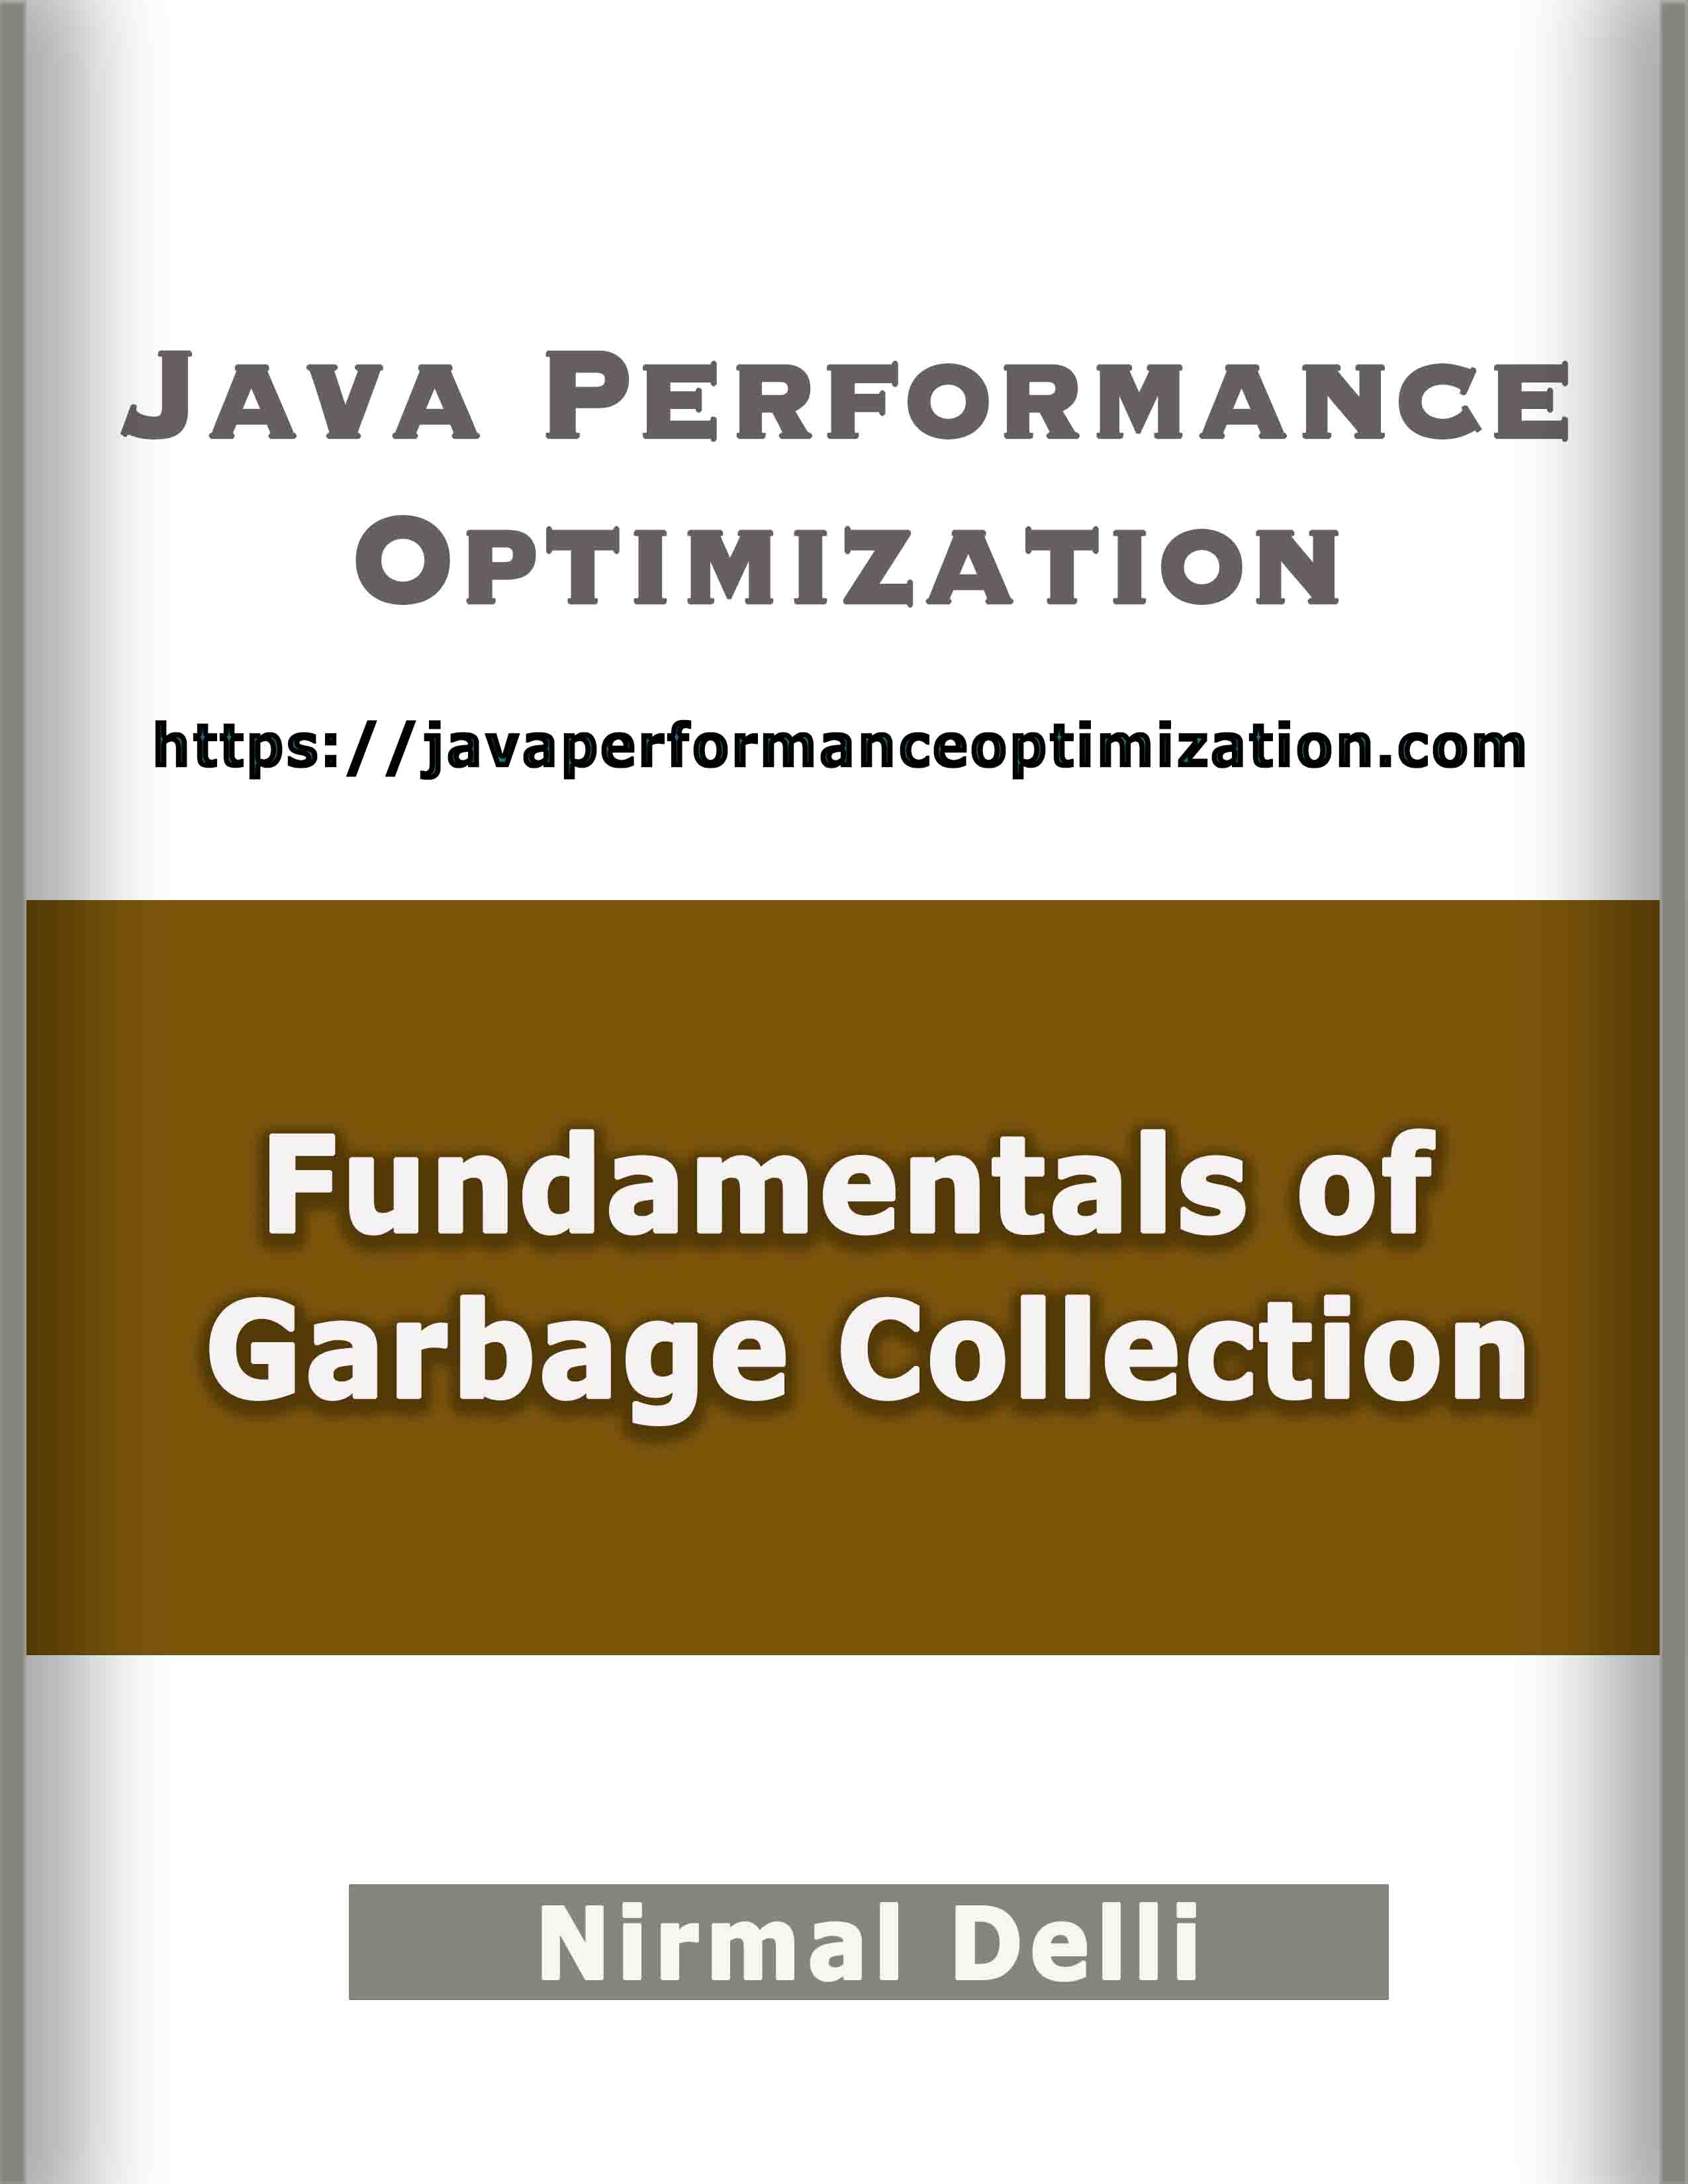 Java performance optimization - Fundamentals of Garbage Collection